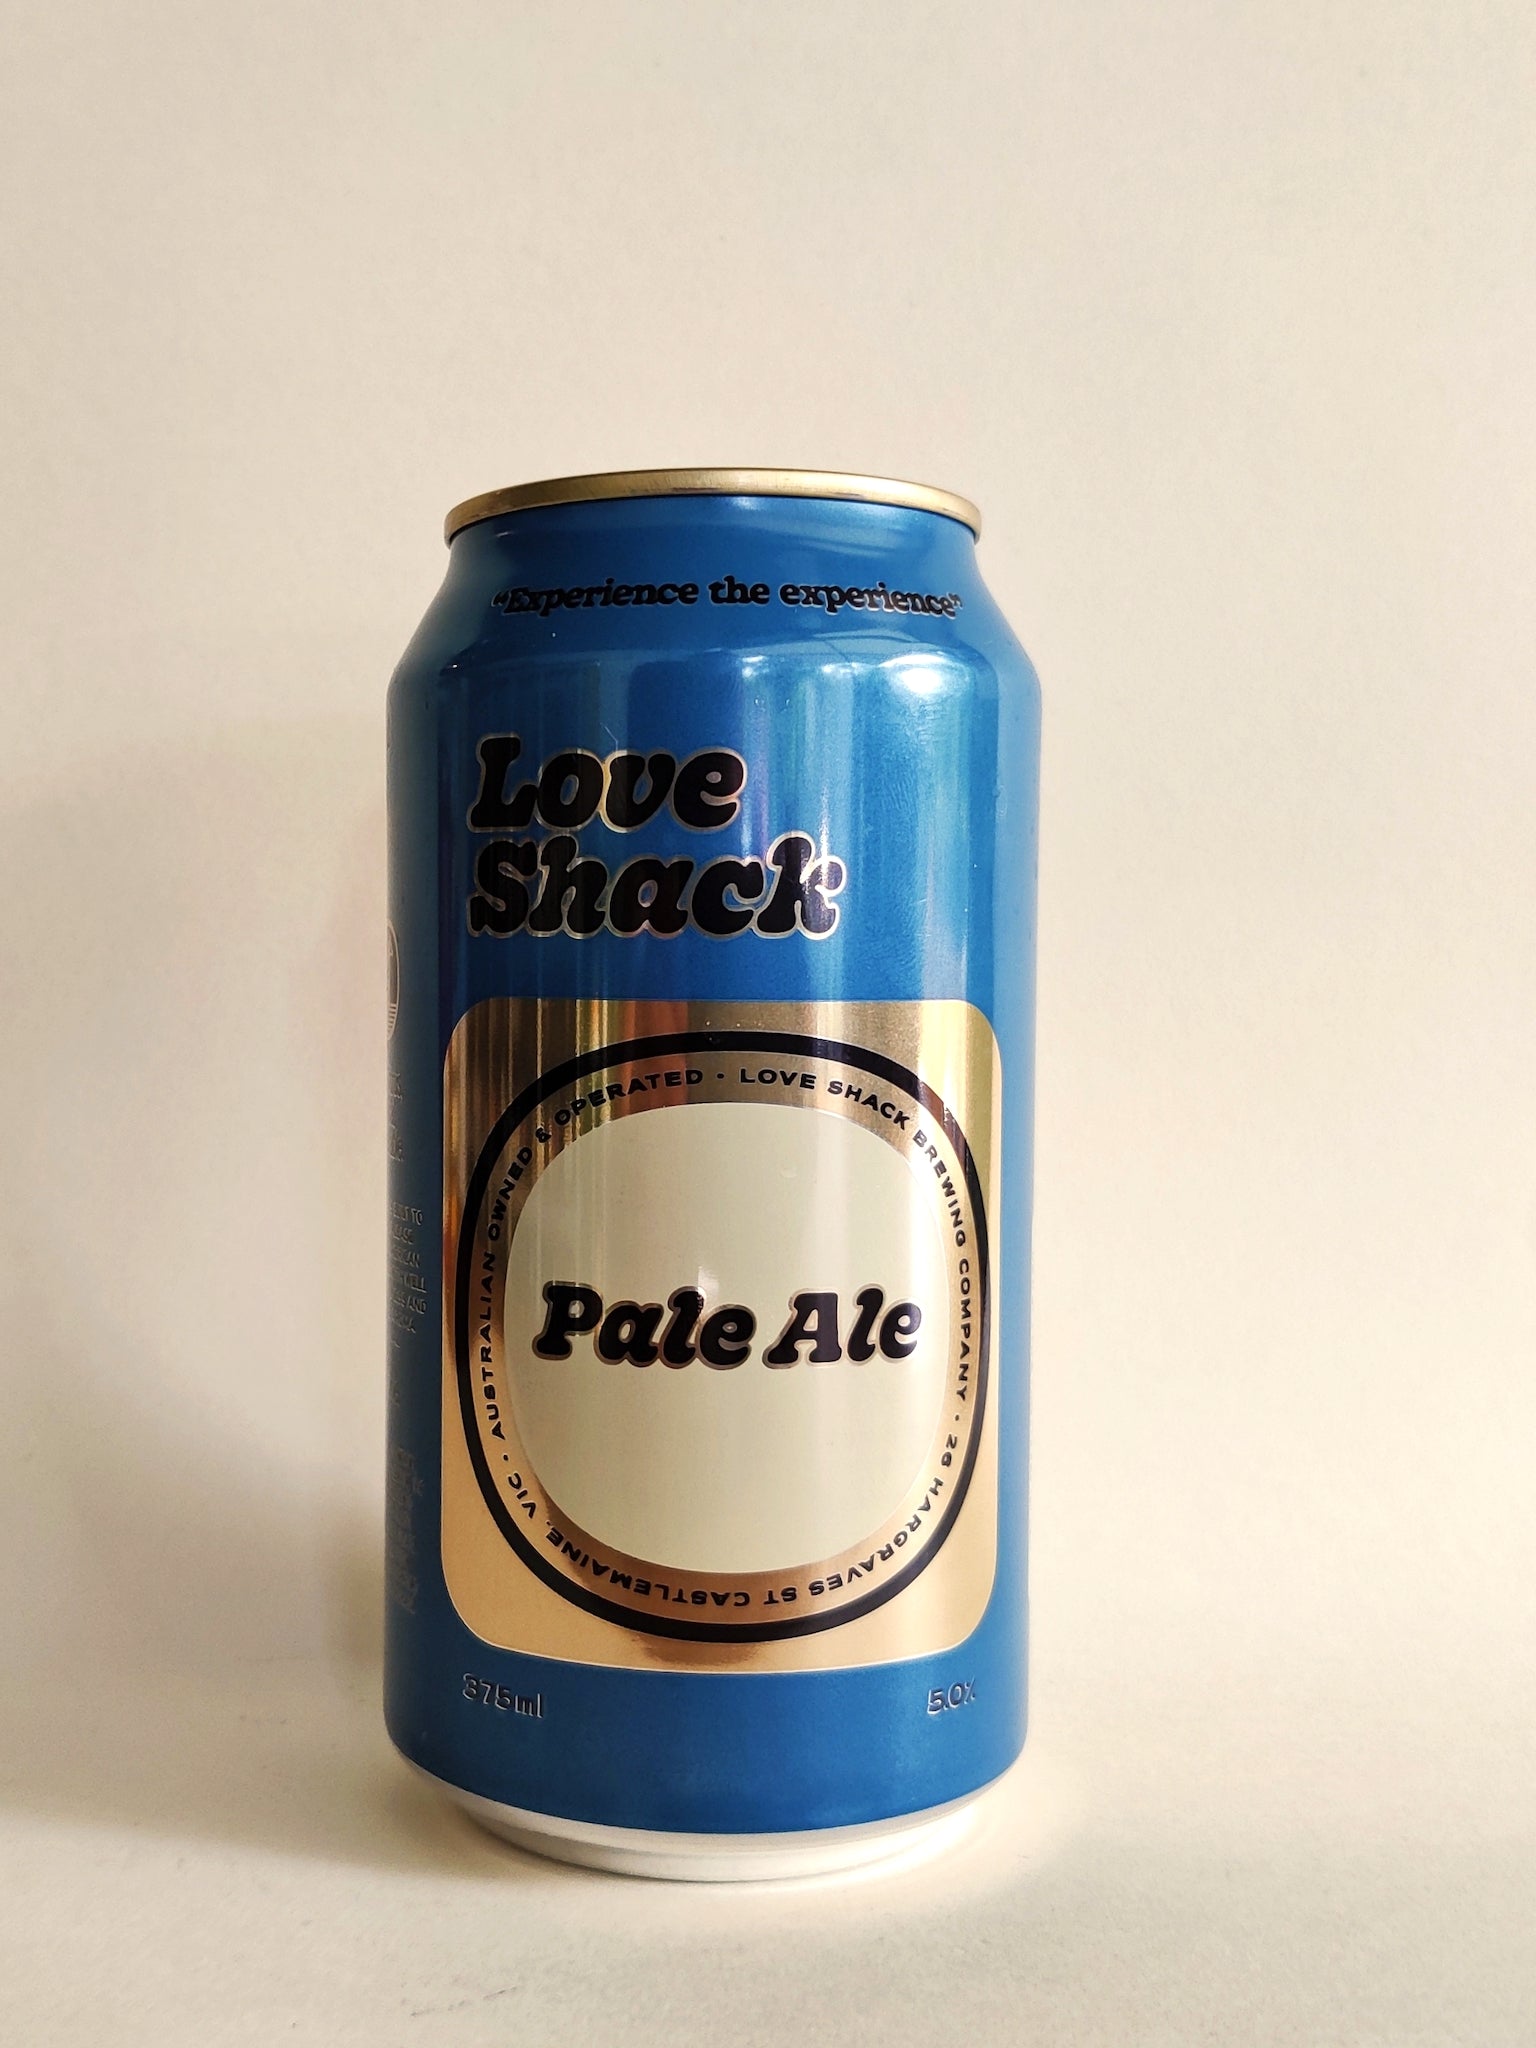 A 375ml can or Love Shack Pale Ale from Castlemaine, Victoria.